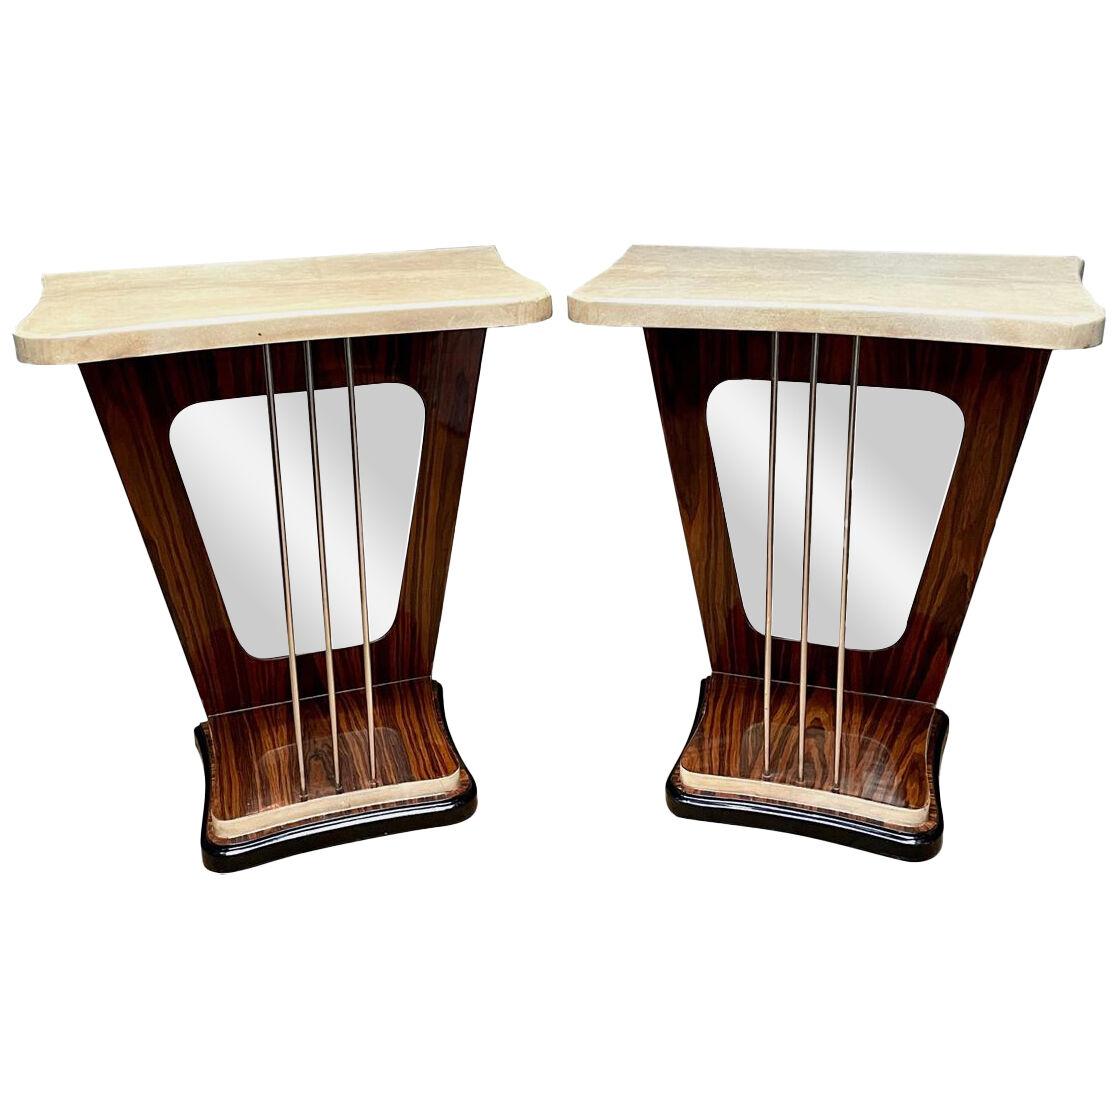 A Pair of Italian Mirrored and Lacquered Goatskin Console Tables